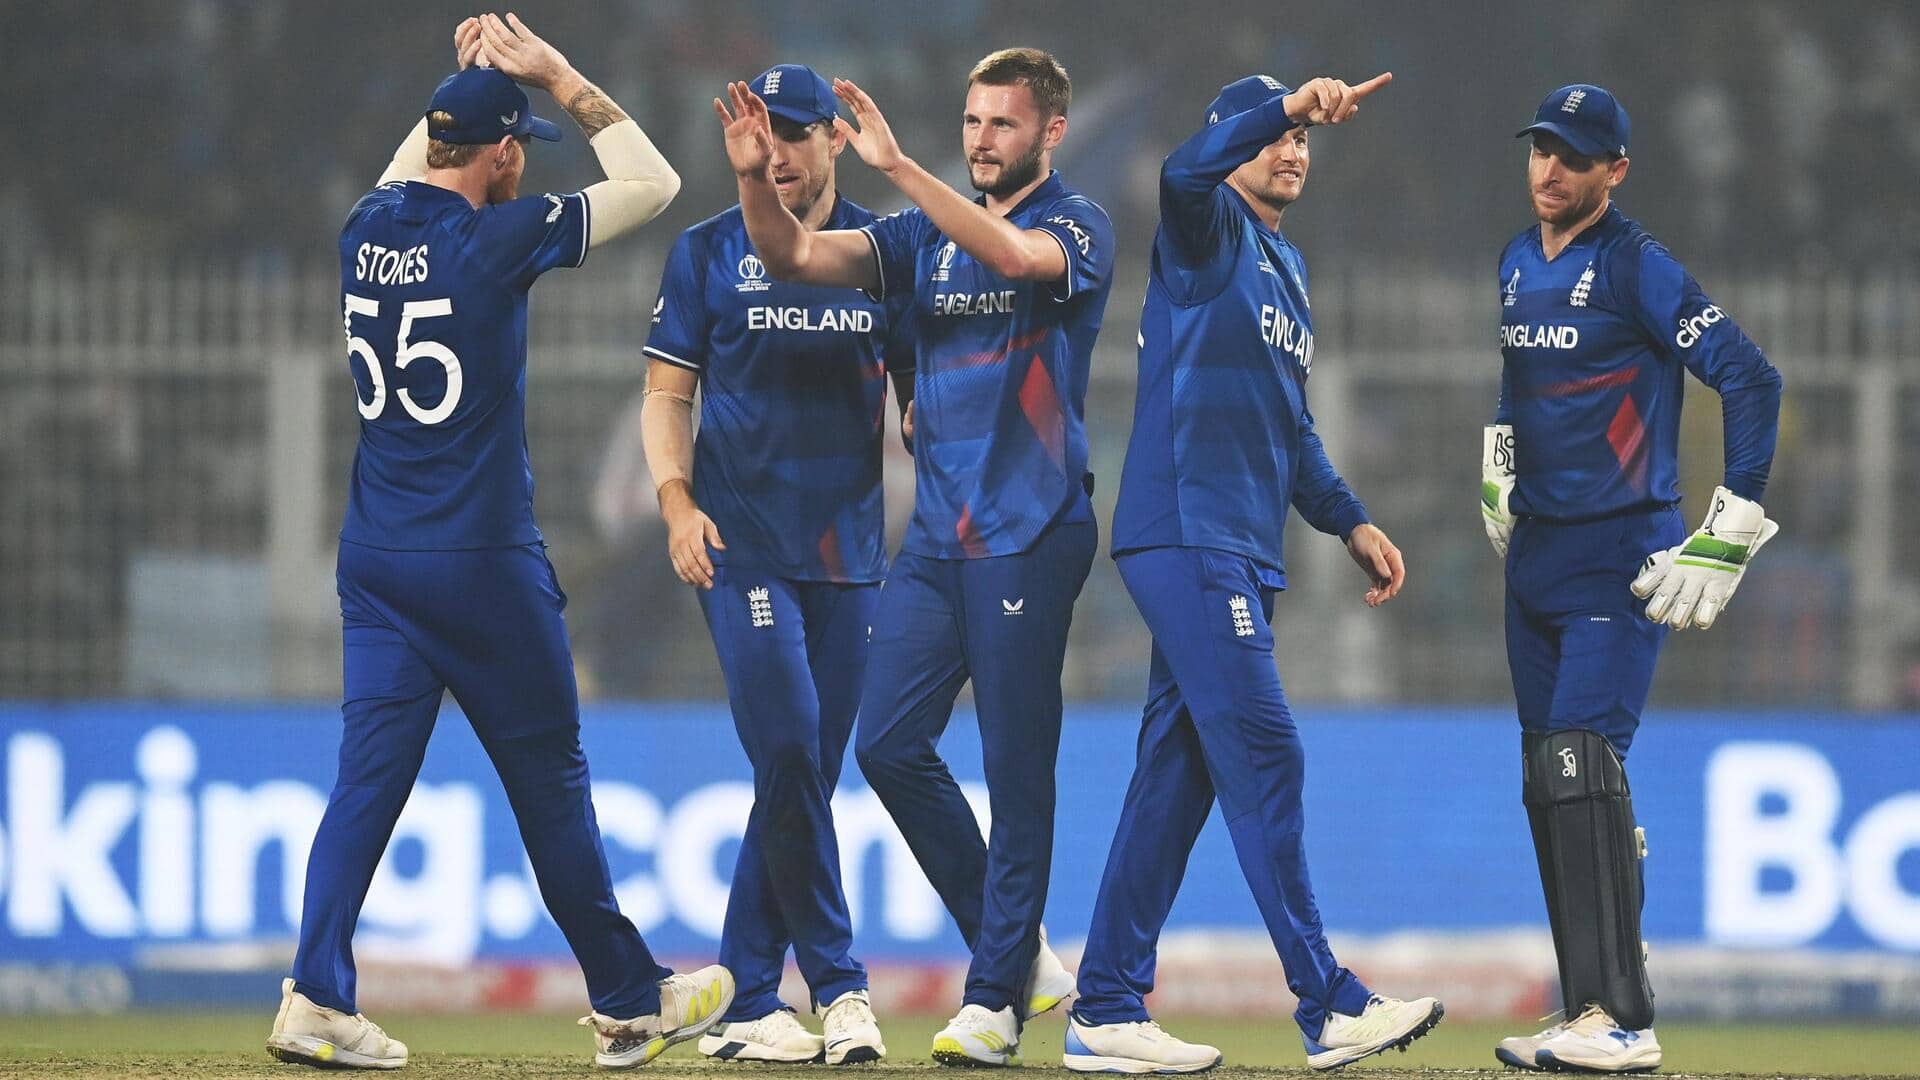 ICC World Cup, England overcome Pakistan at Eden Gardens: Stats